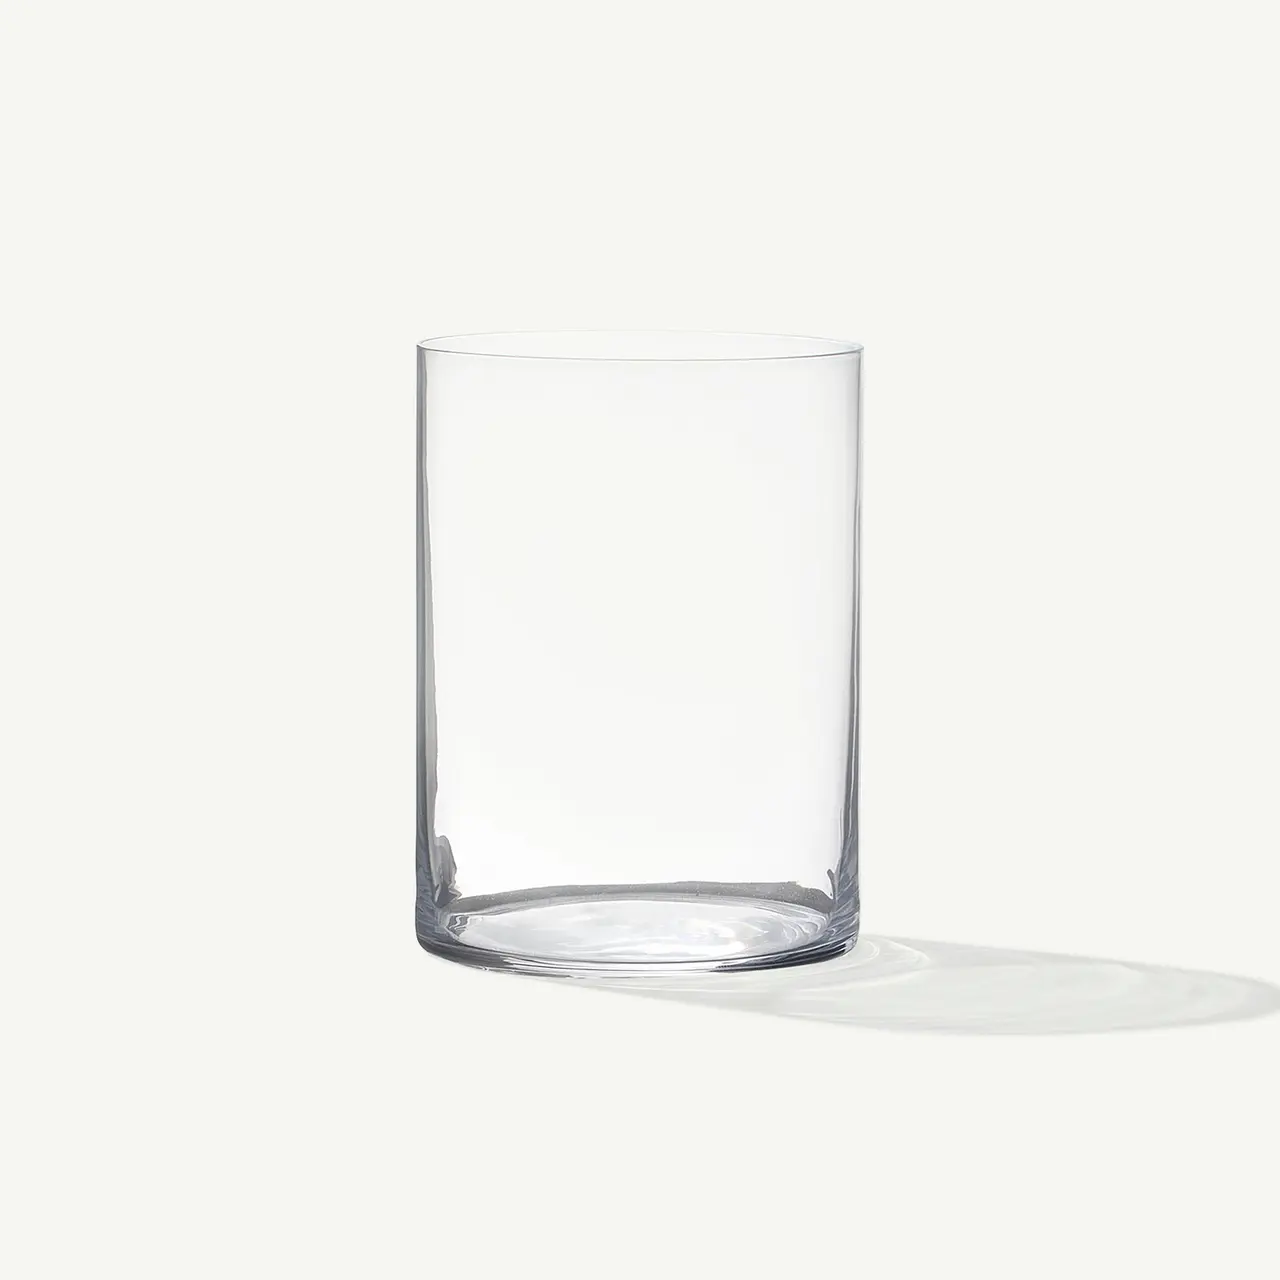 An empty clear glass is standing upright on a pale background, casting a soft shadow.